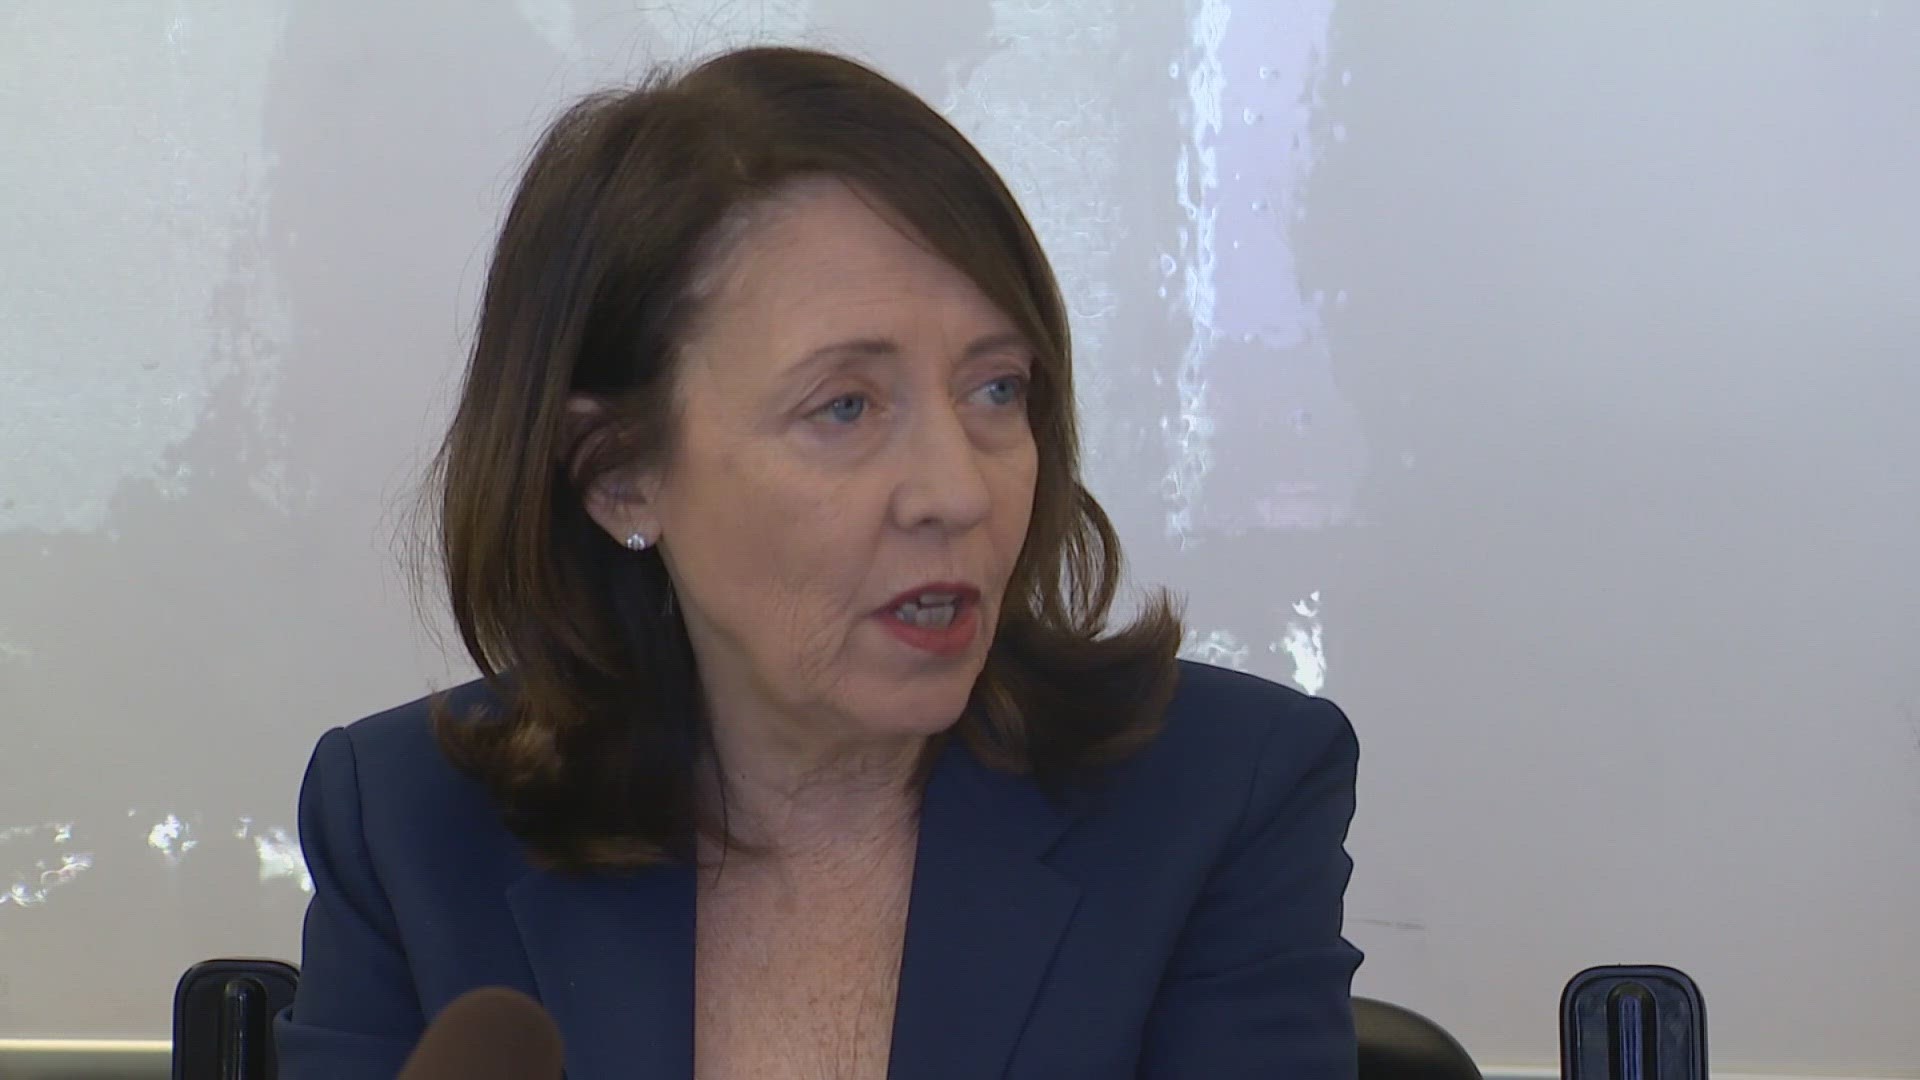 Sen. Maria Cantwell held a stop of her listening tour in Everett Monday, hearing from people whose lives have been touched by the fentanyl epidemic.